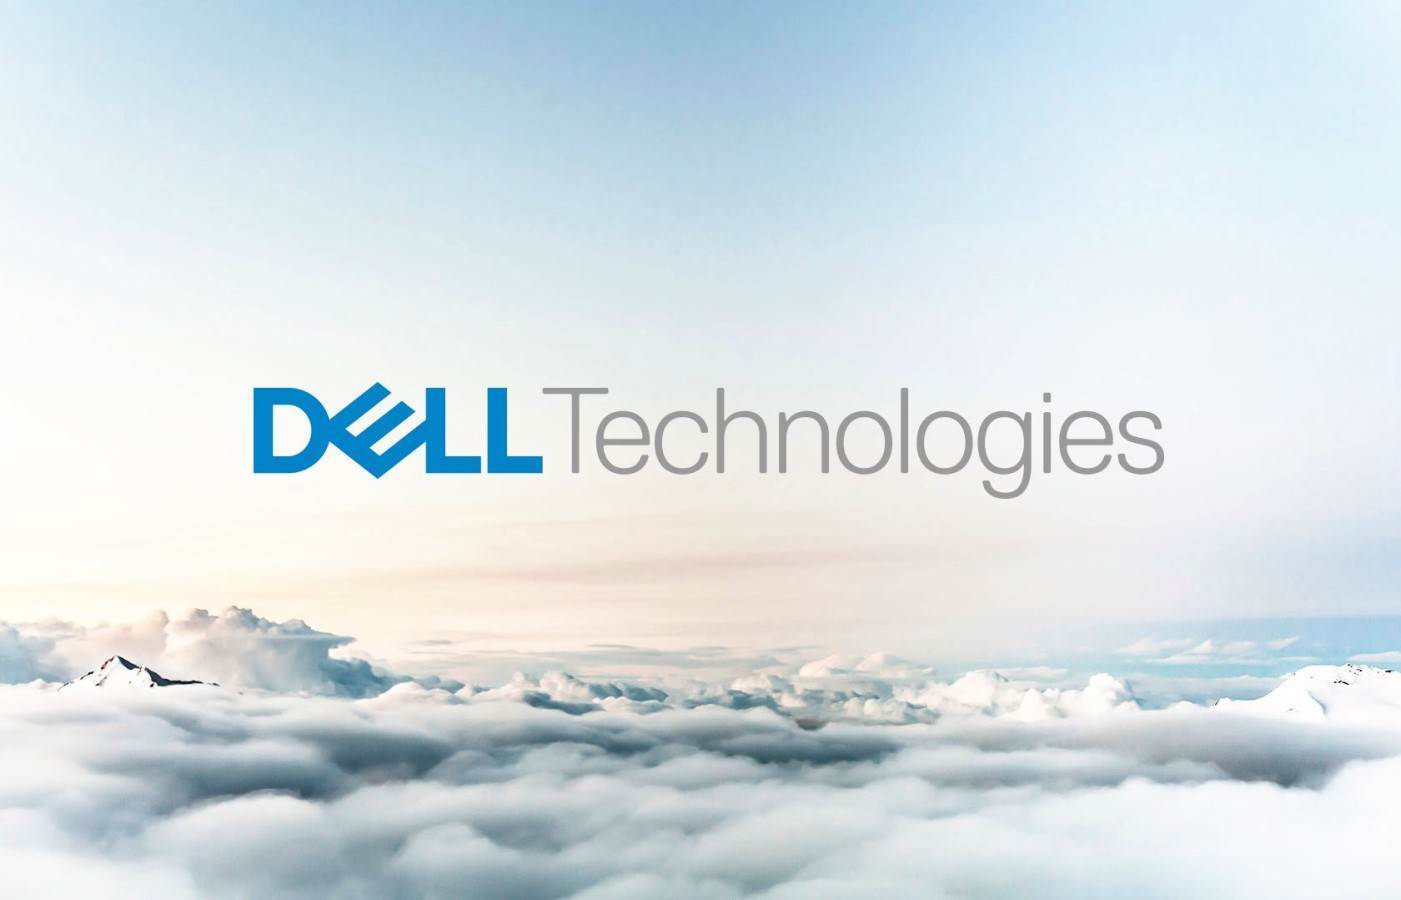 Dell pushes selfservice and automation for channel tools Finance CRN Australia